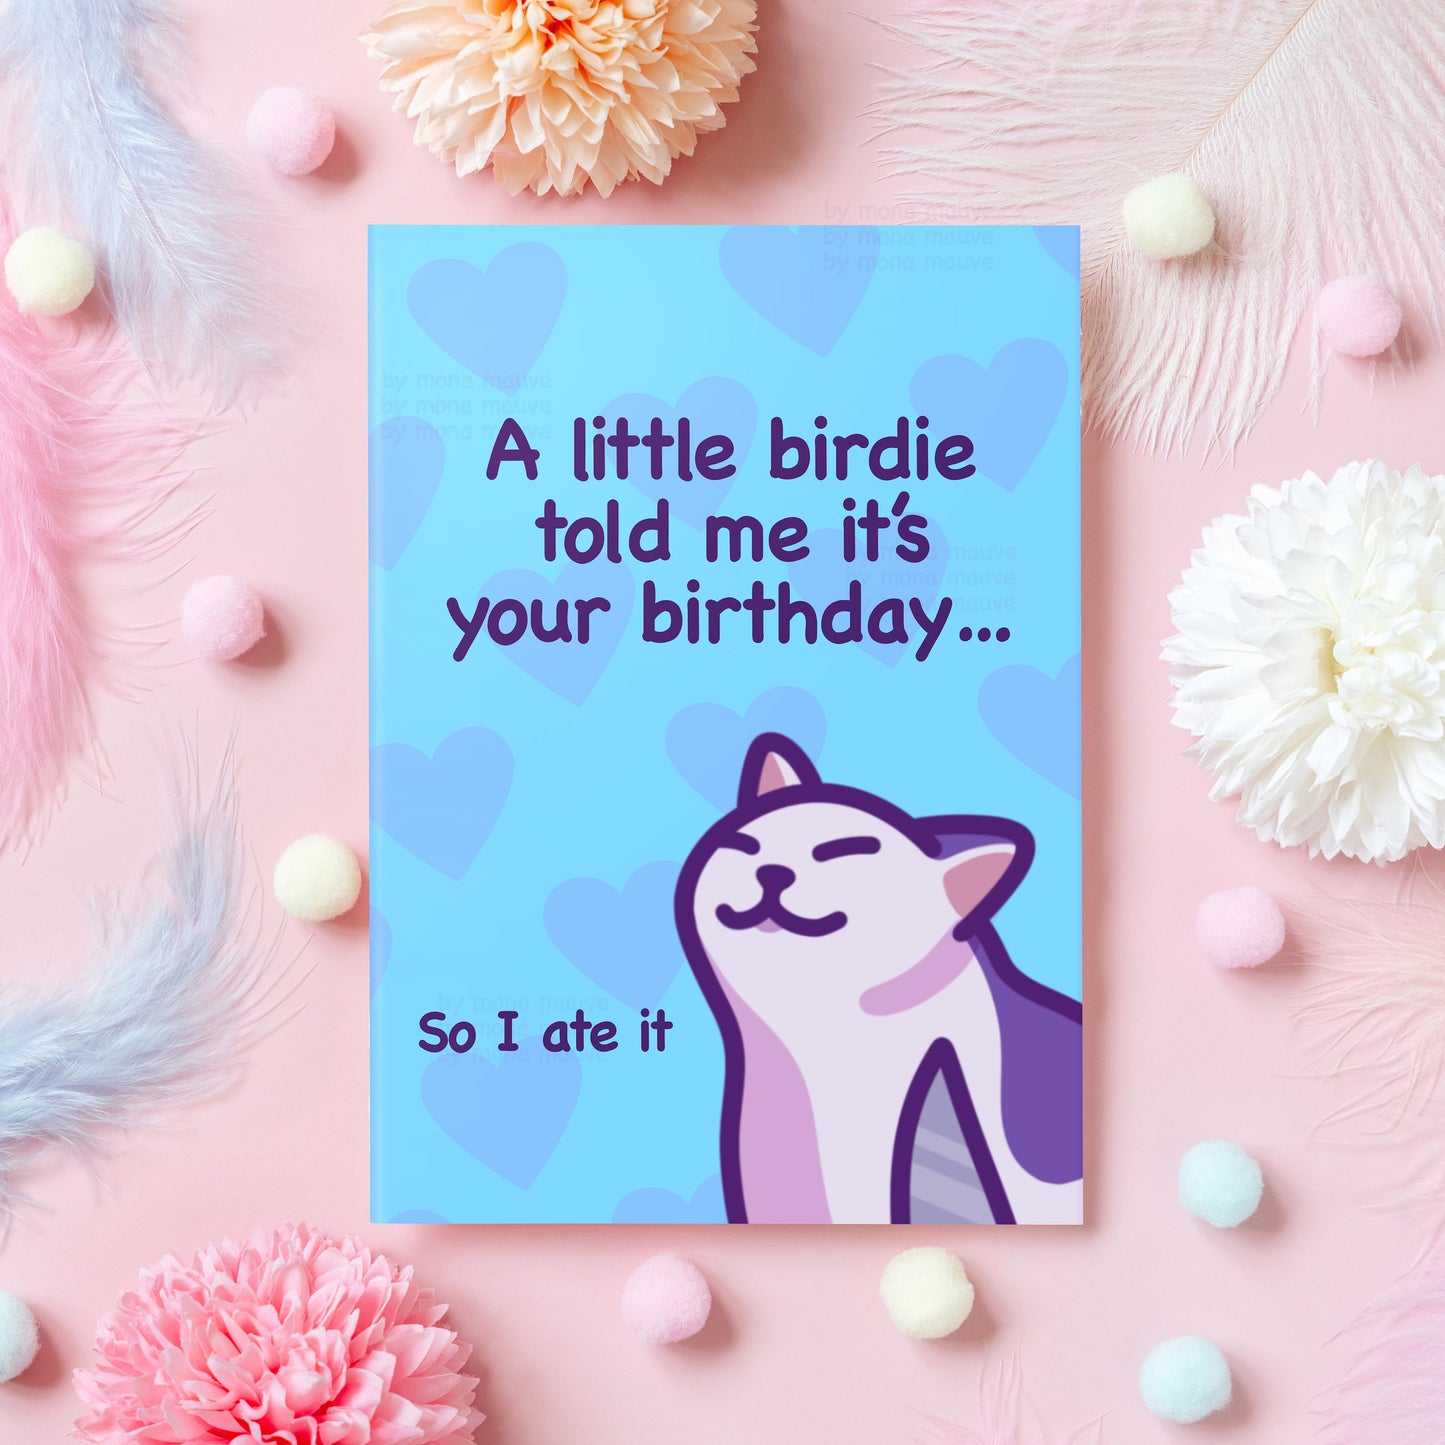 Funny Birthday Card | A Little Birdie Told Me It’s Your Birthday | Cat Meme | Gift For Boyfriend, Girlfriend, Husband, Best Friend - Her or Him